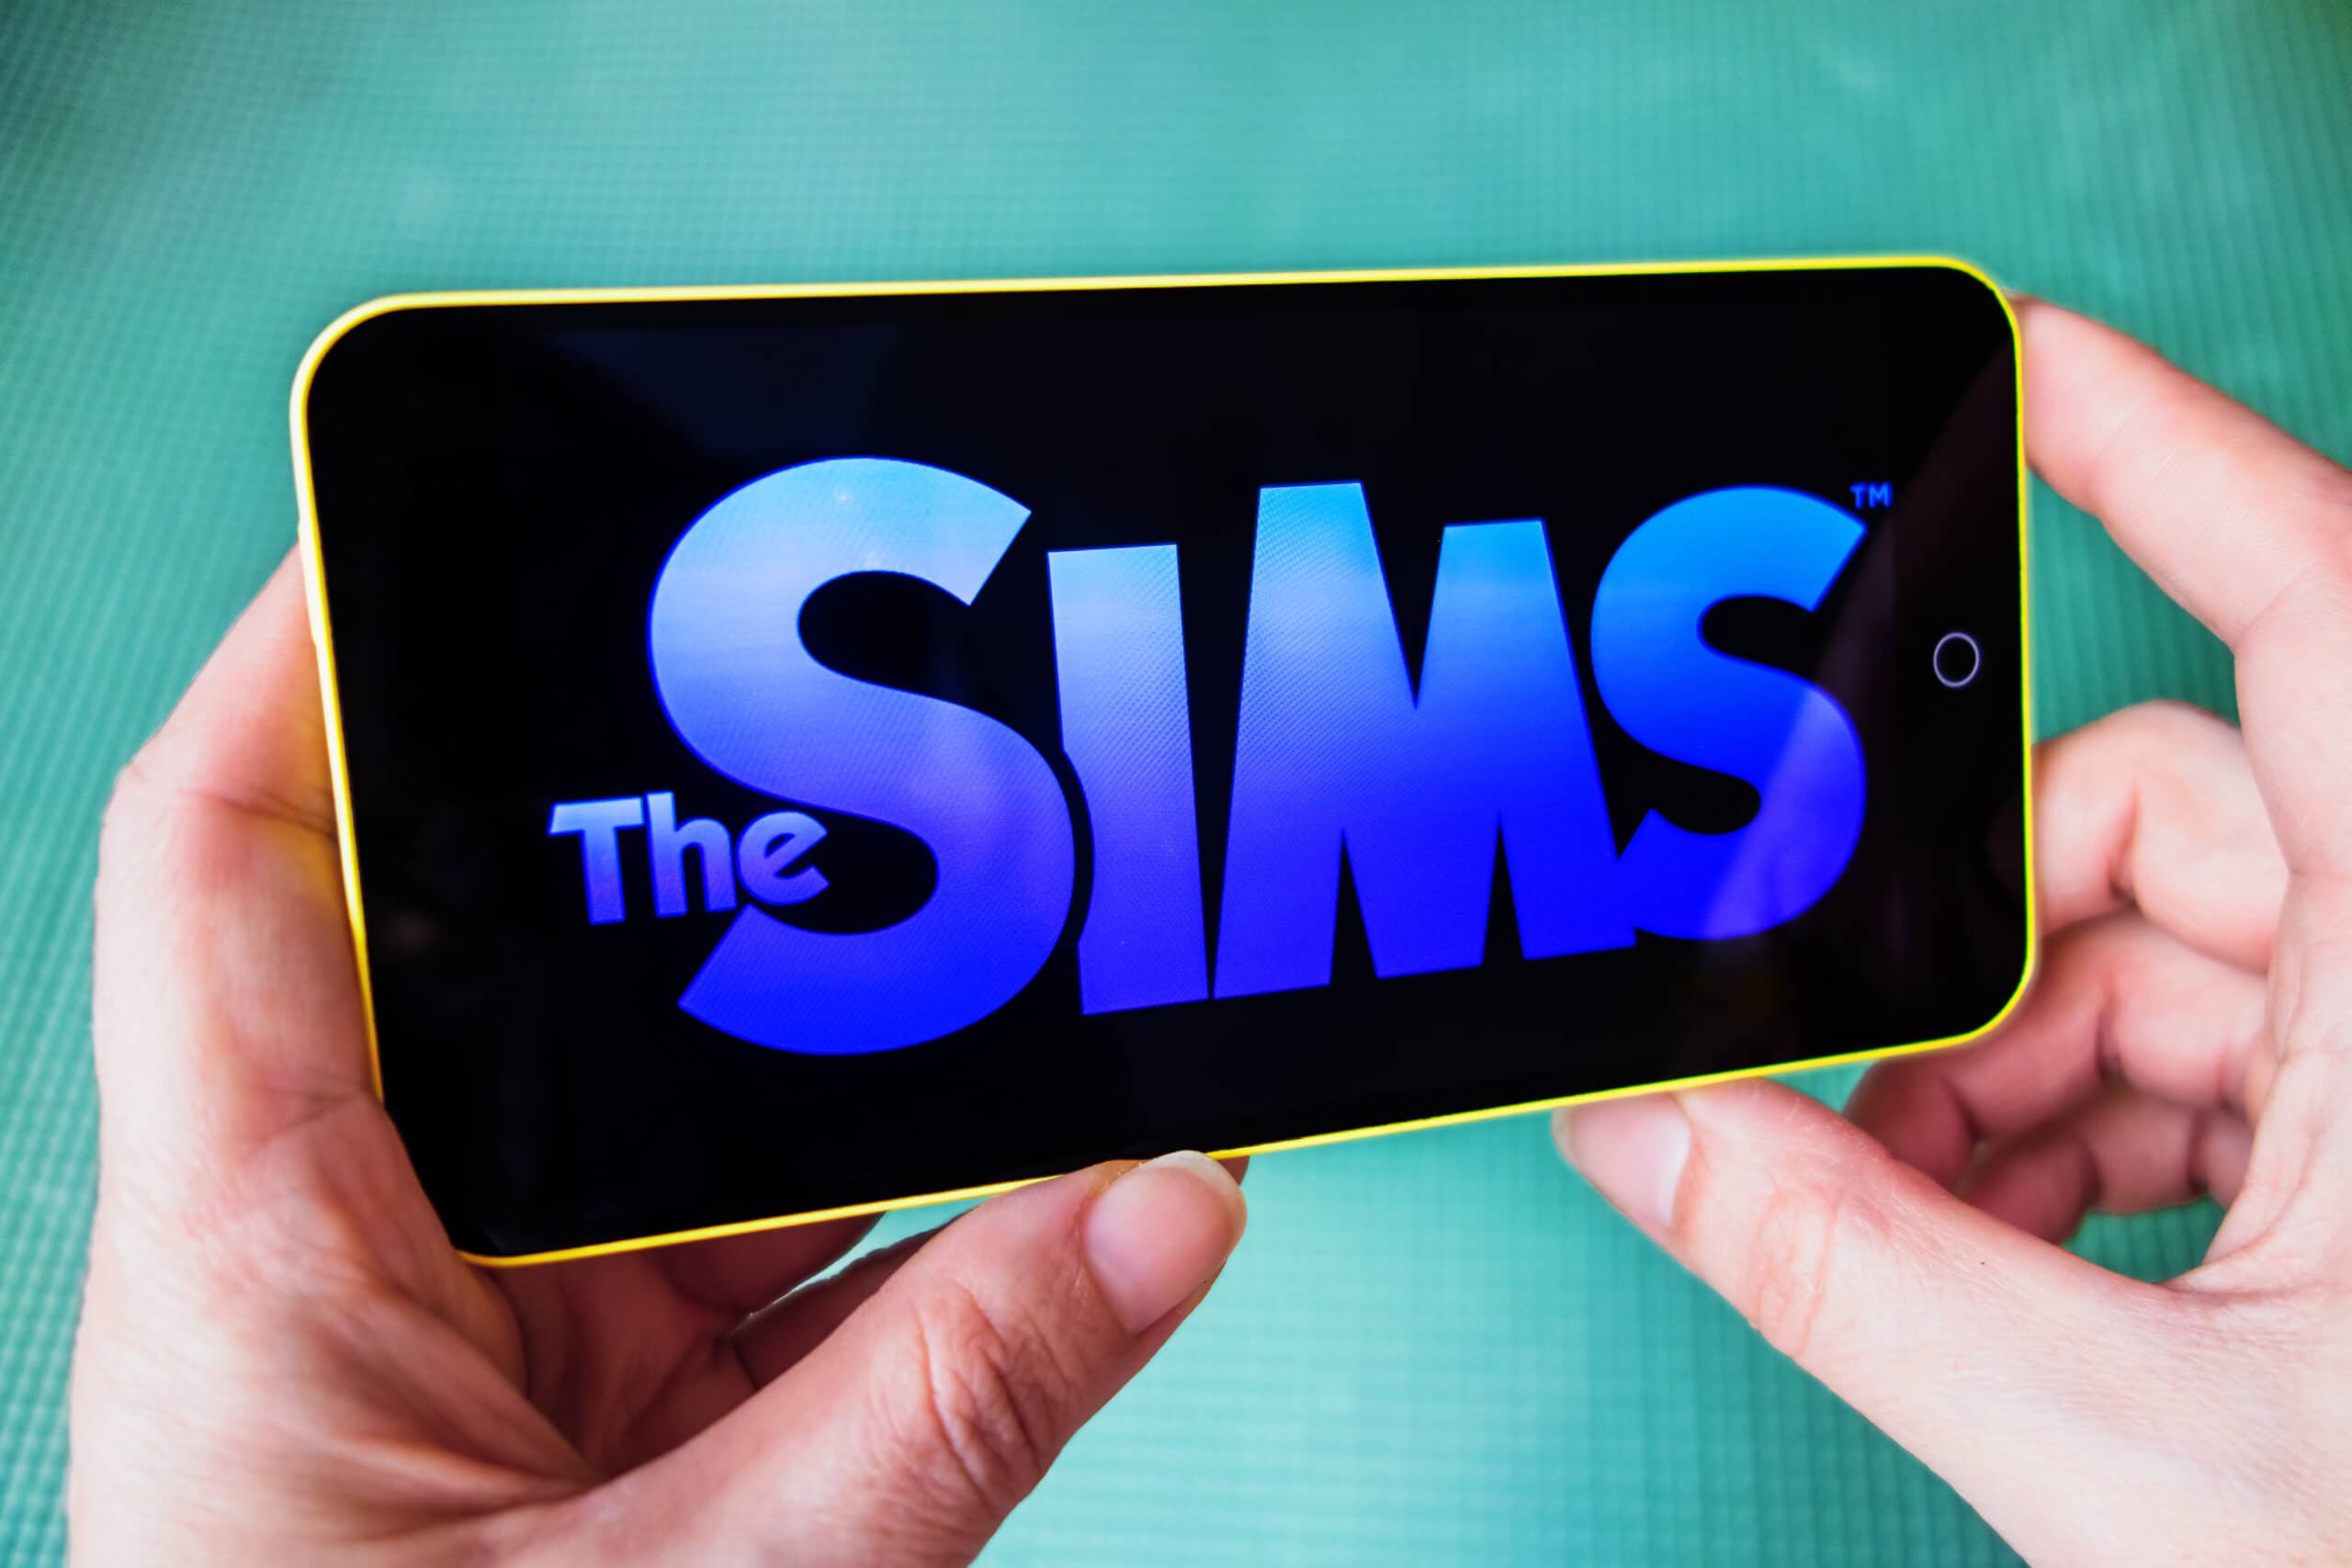 The Sims Mobile - Unlimited Money Cheat Plus Unlimited SimCash, Health And  More